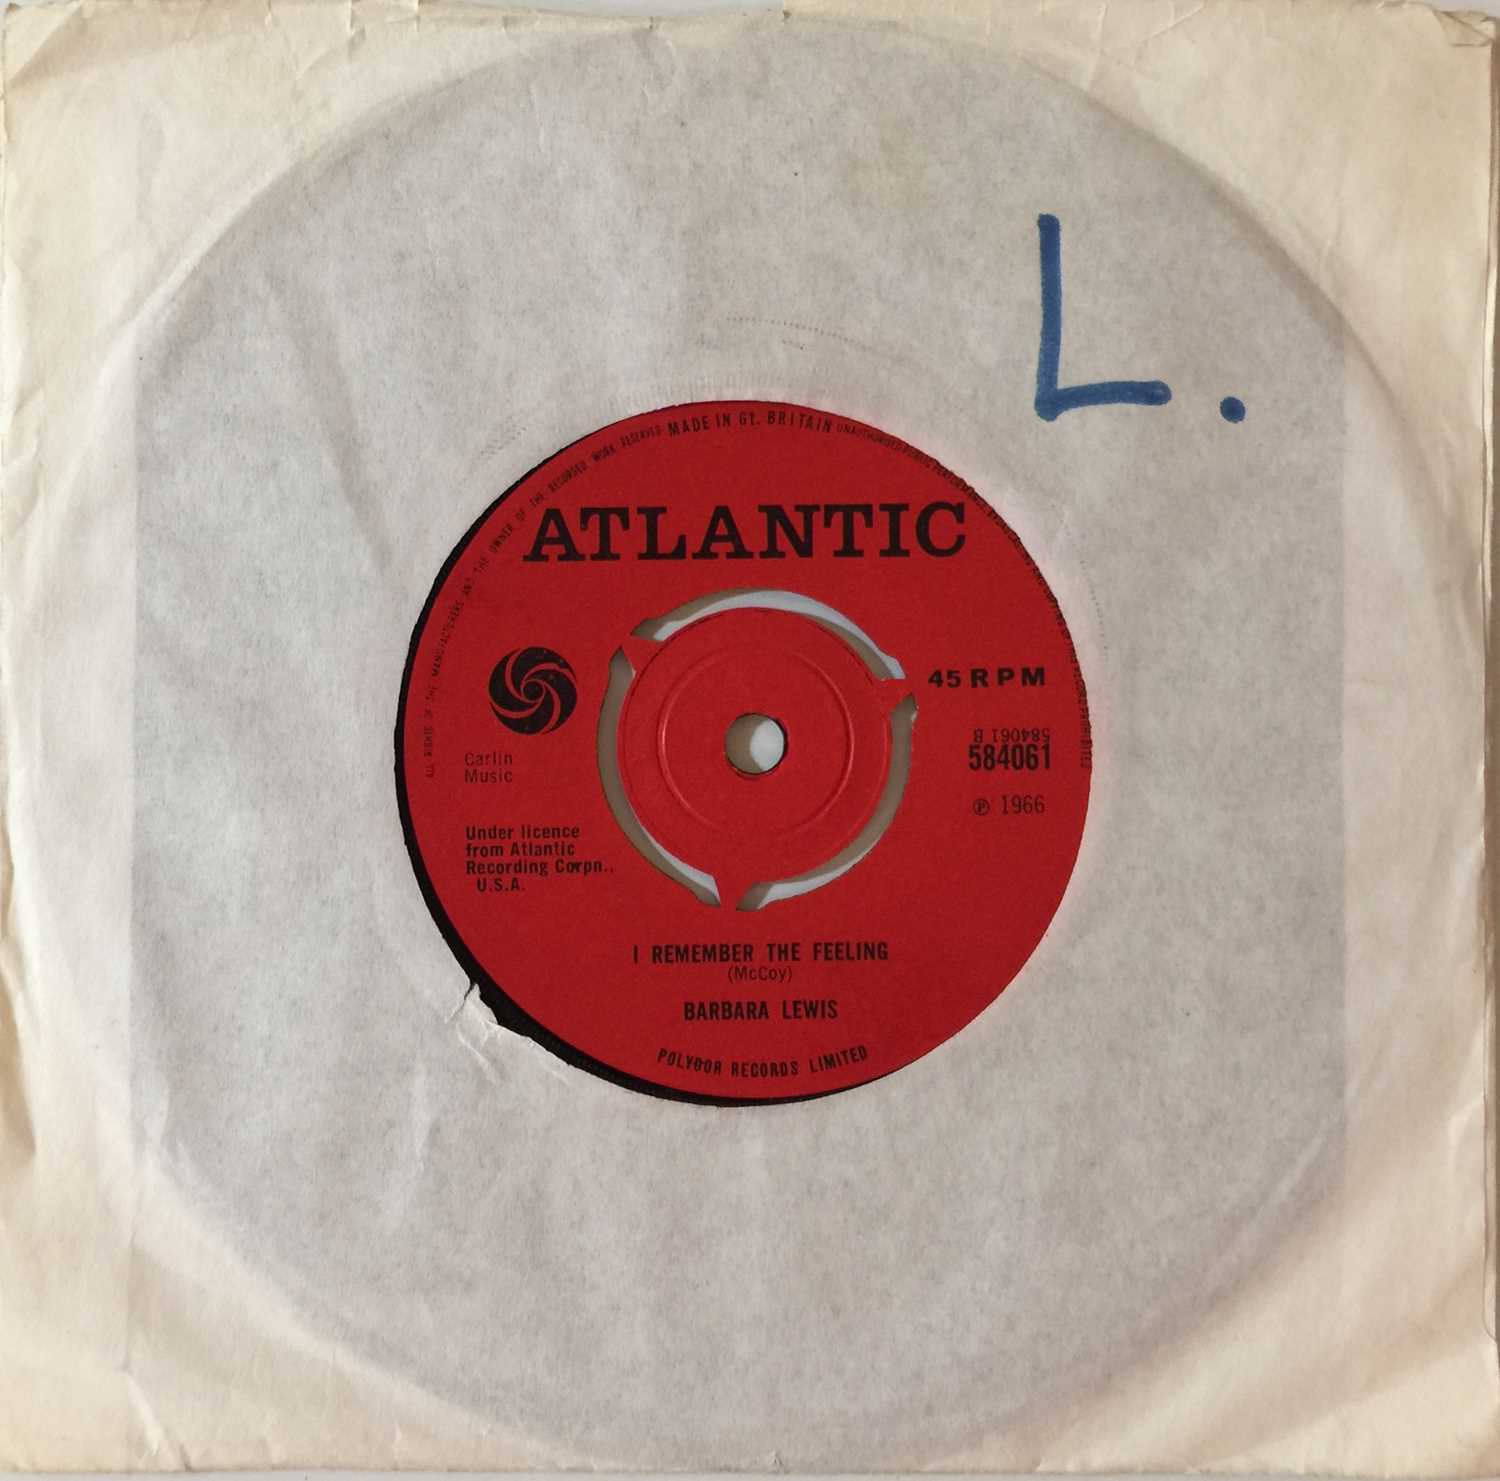 Lot 5 - BARBARA LEWIS - I REMEMBER THE FEELING C/W BABY WHAT DO YOU WANT ME TO DO 7" (UK ORIGINAL - ATLANTIC 584061)